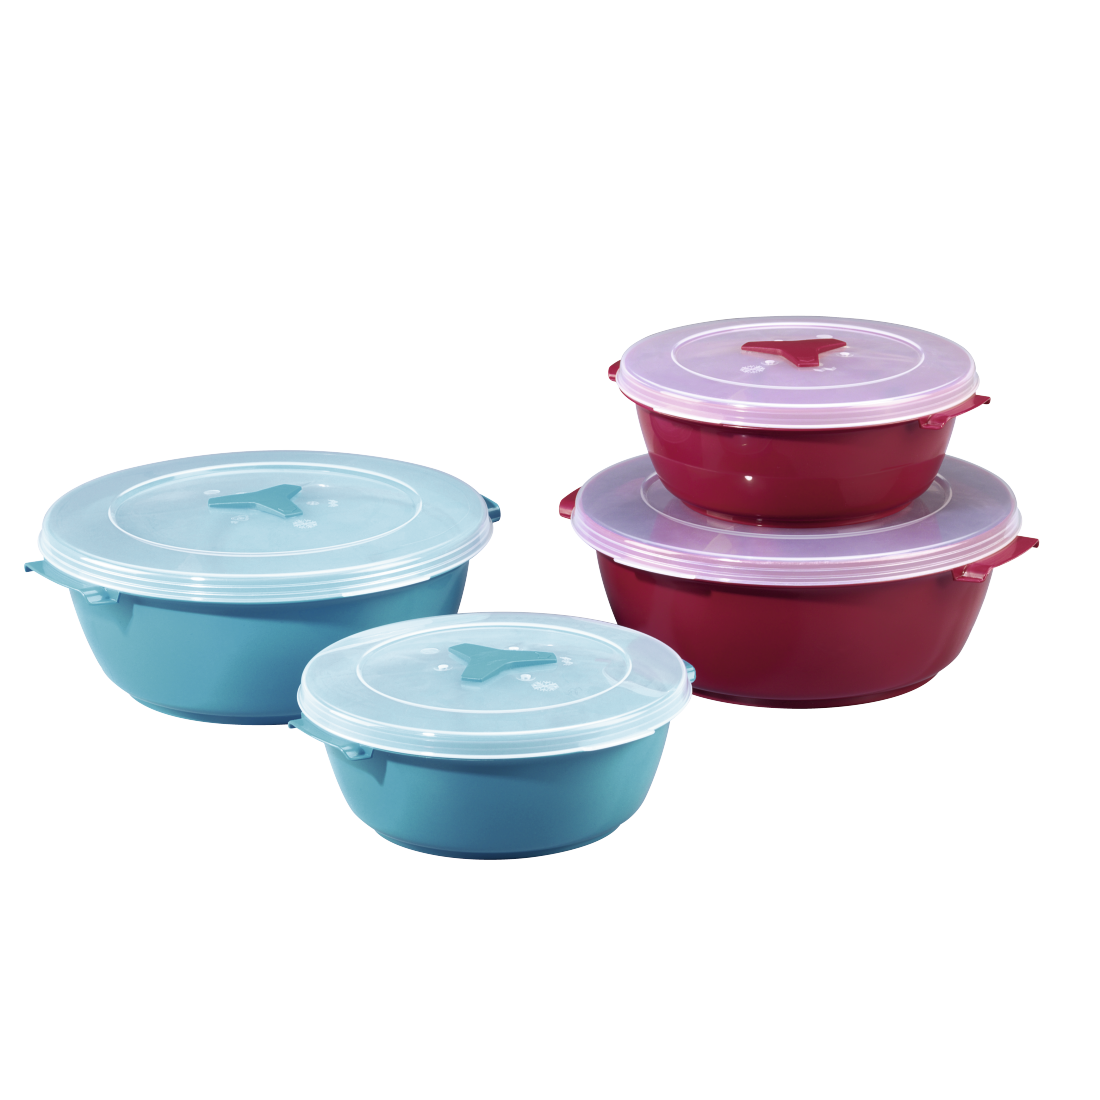 abx High-Res Image - Xavax, Round Microwave / Freezer Container Set, 2 Pcs., turquoise / burgundy